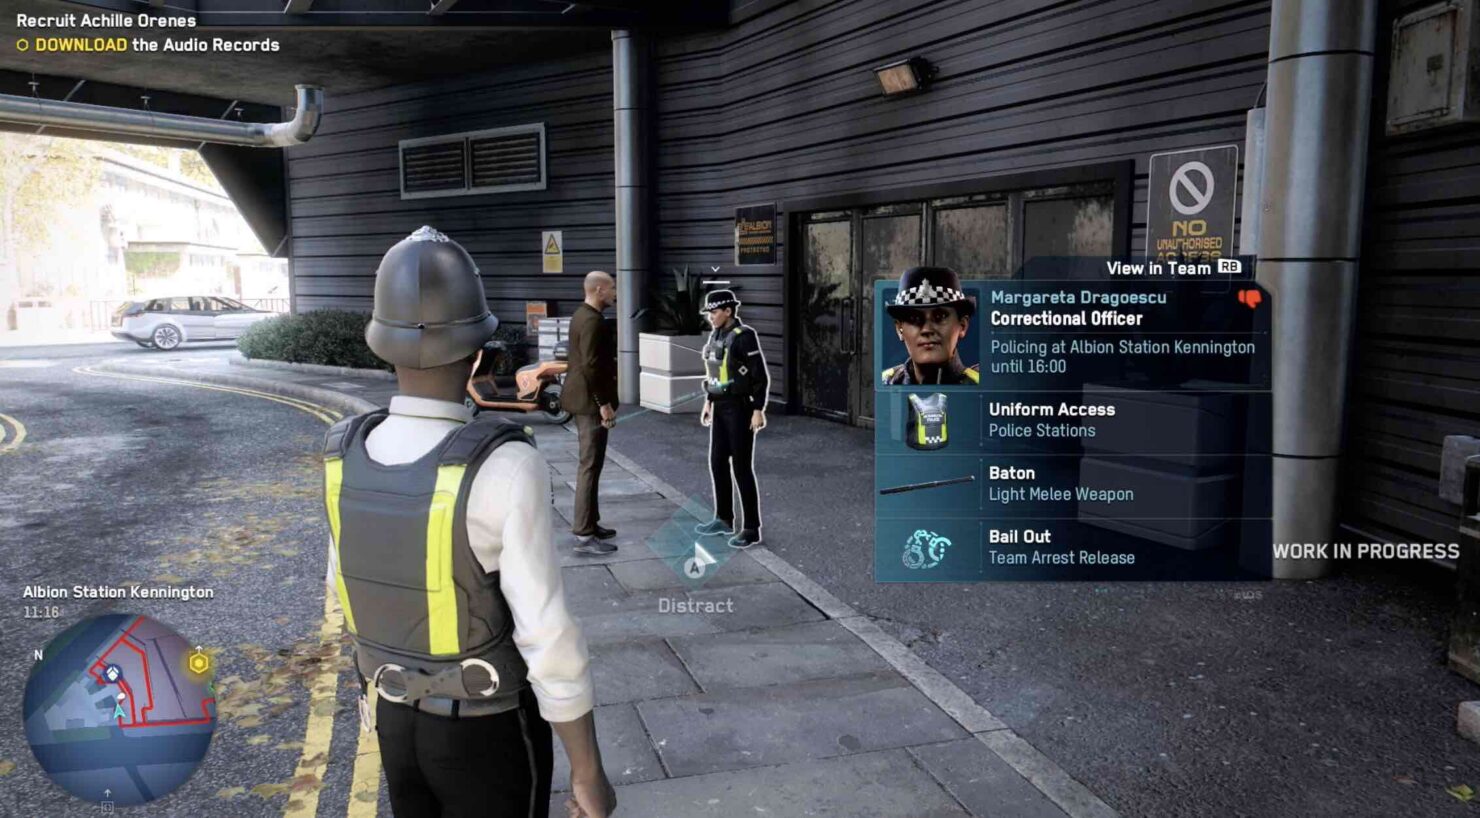 Watch Dogs Legion uniformed access for police officers